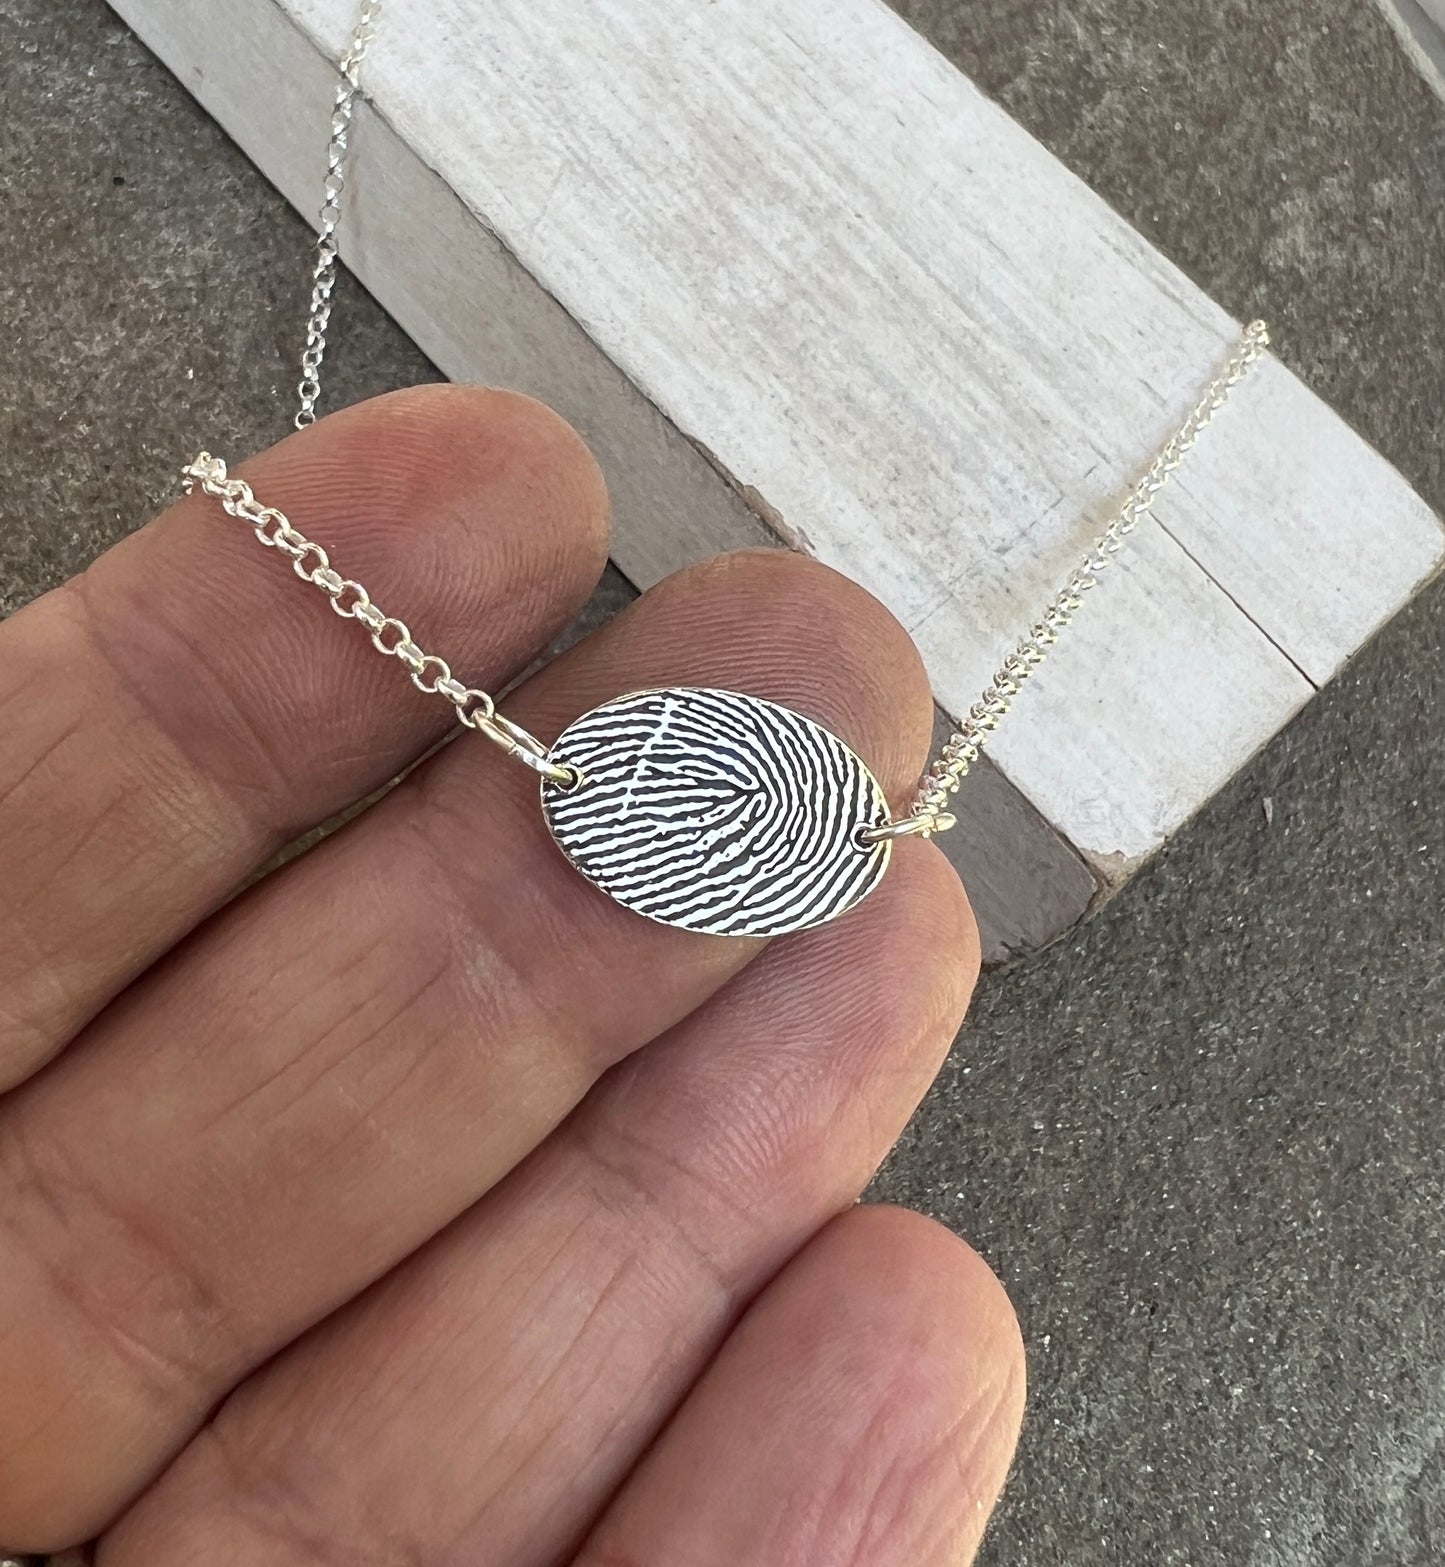 Fingerprint Necklace with Handwriting on the Back, Solid Sterling Silver